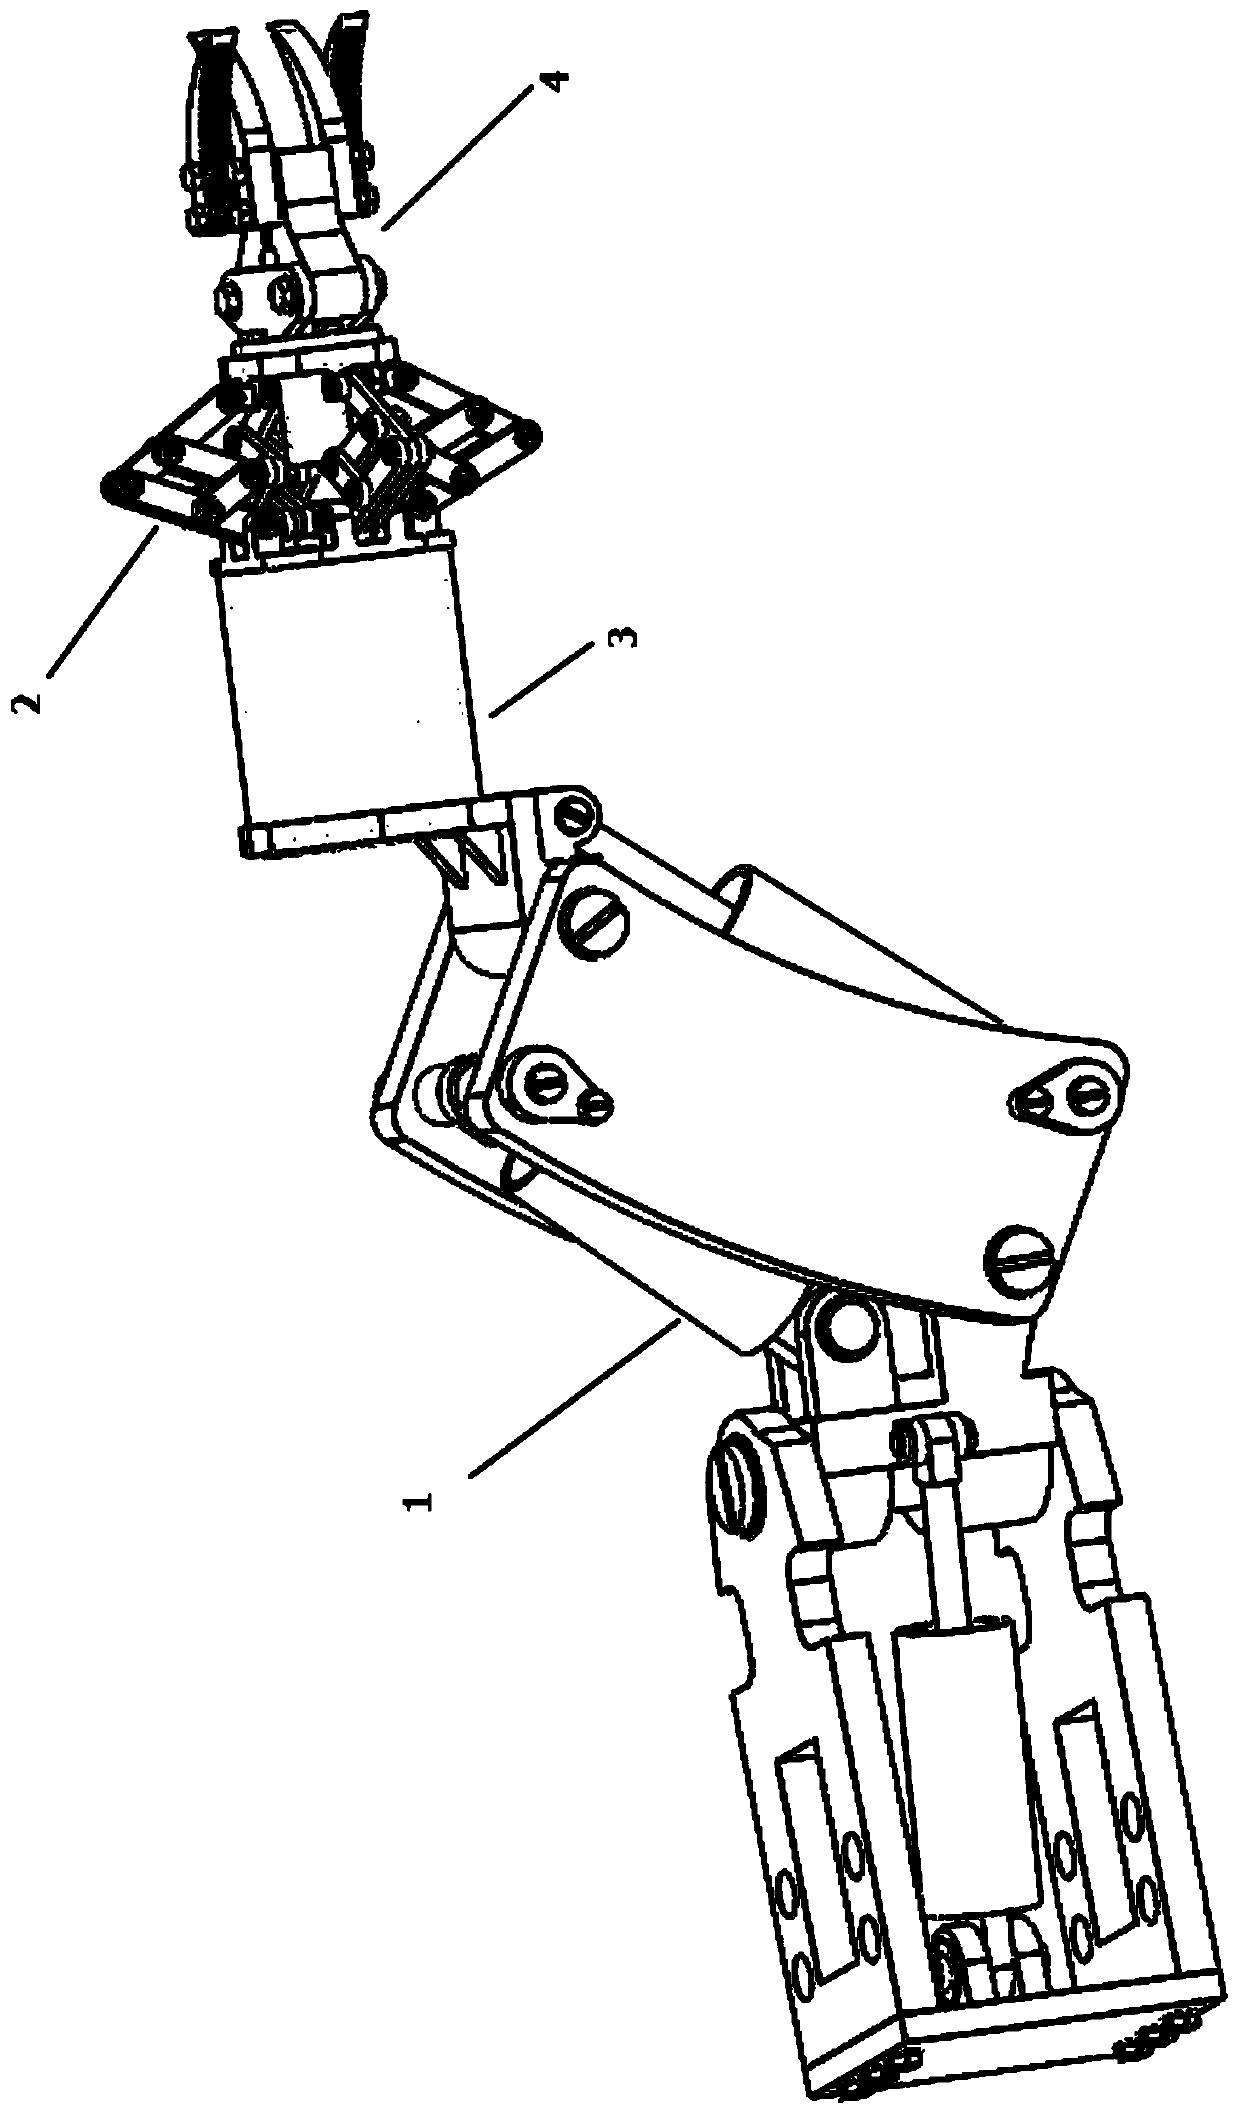 A macro-micro-manipulator arm for an underwater robot